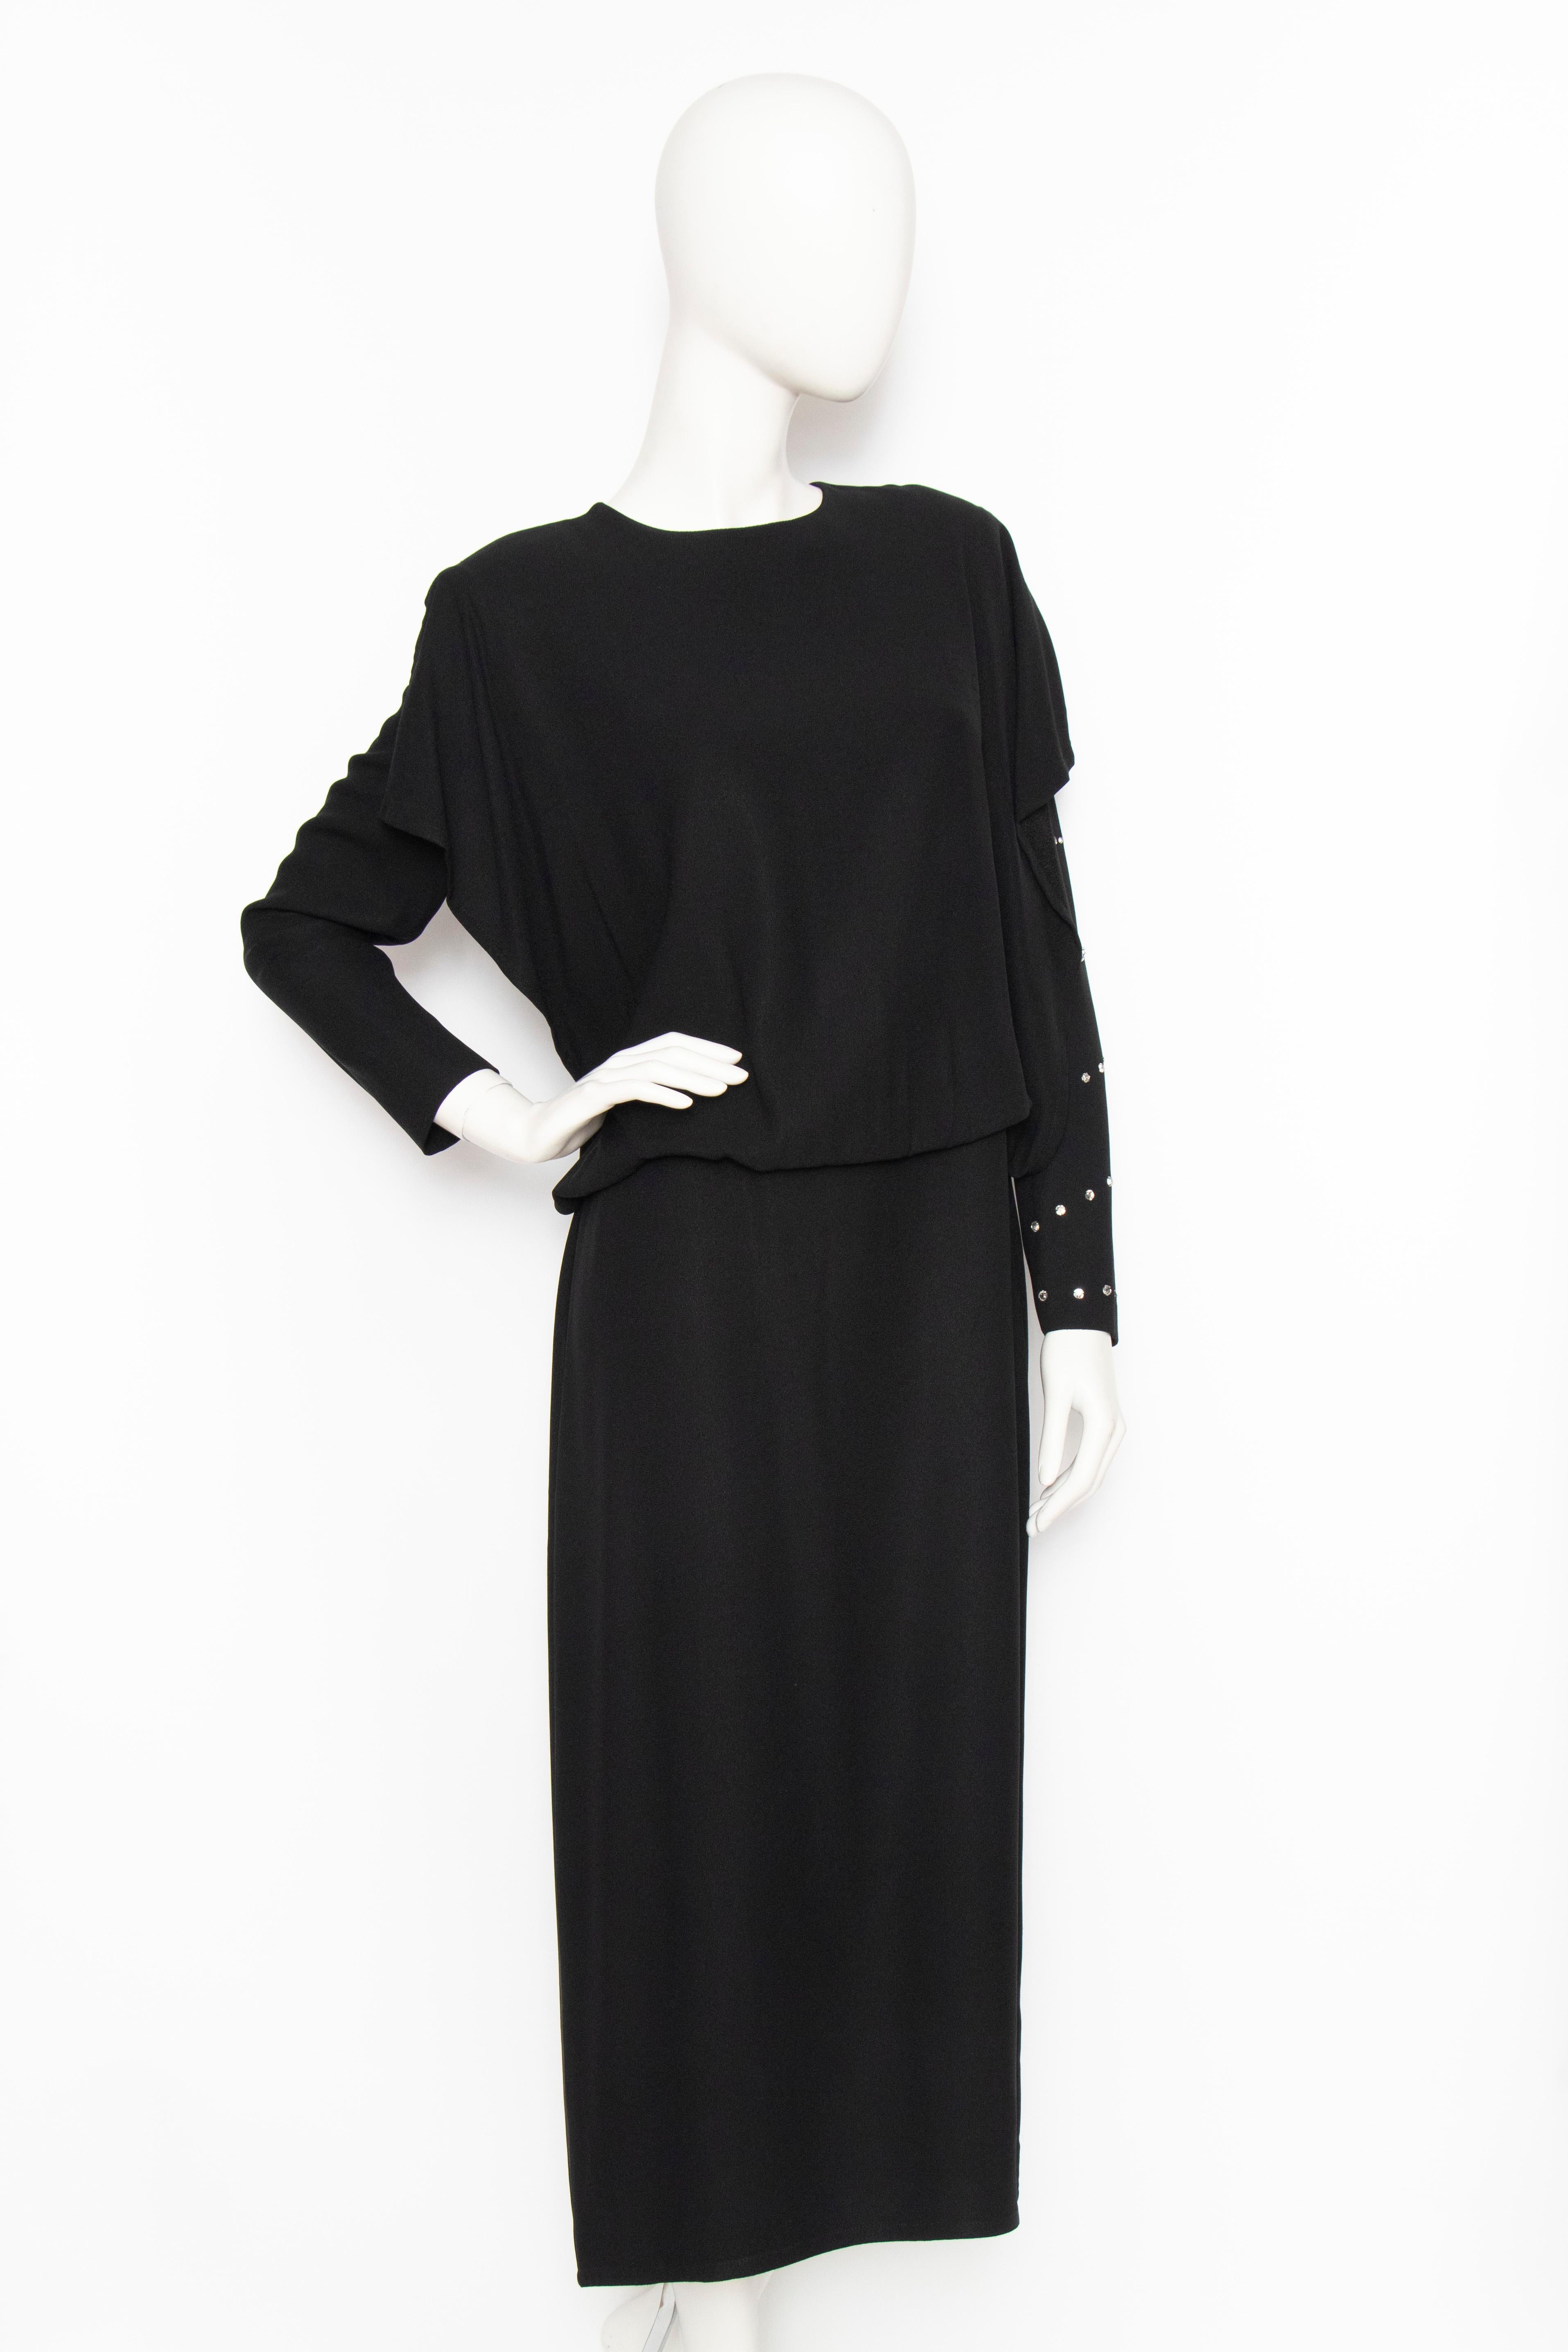 A 1980s Sonia Rykiel black viscose dress with a loosely fitted skirt and voluminous blouse with long sleeves. A single sleeve is encrusted with large rhinestones and the back has a push-button closure. The dress is unlined. 

The size of the dress